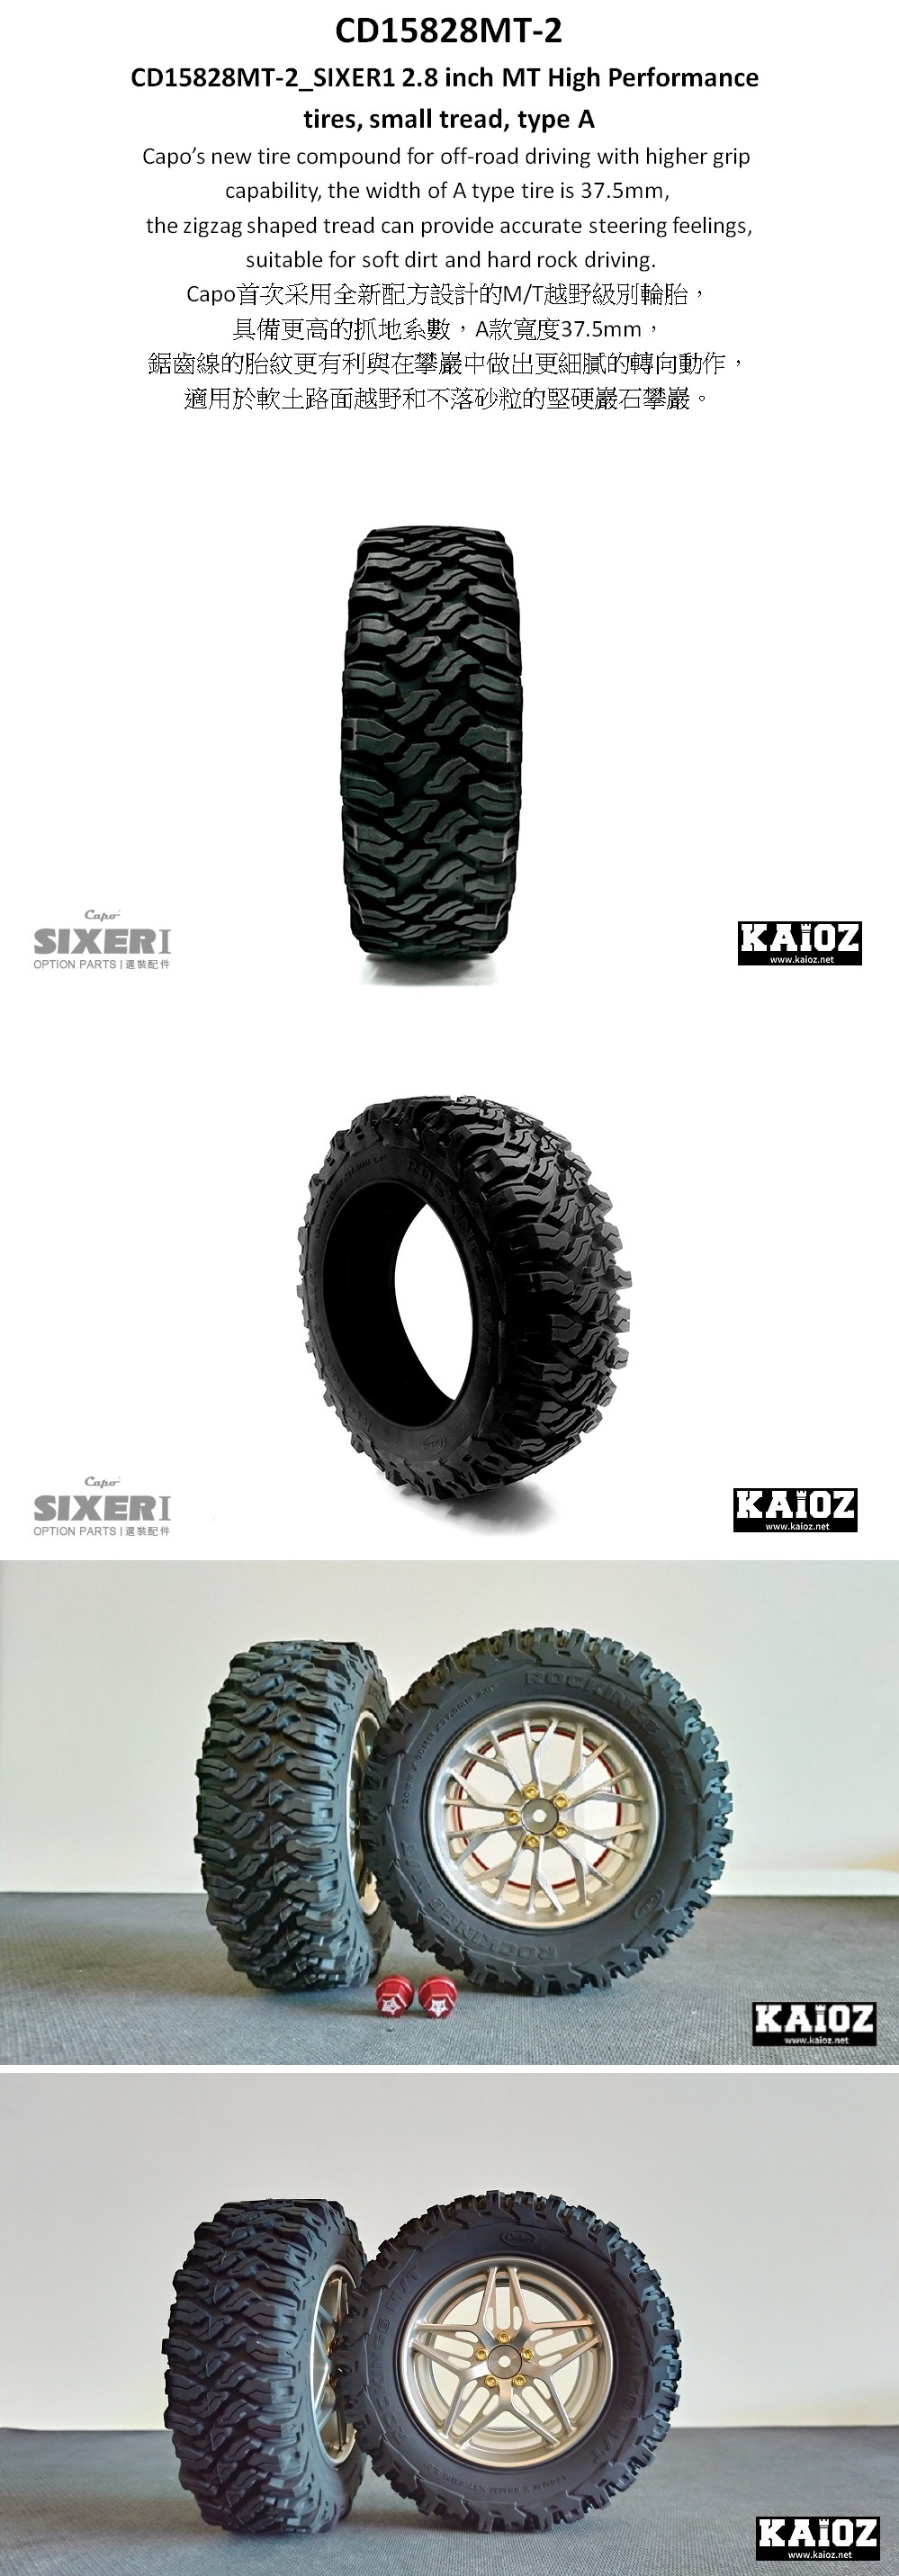 26_CD15828MT-2_SIXER1 2.8 inch MT High Performance tires, small tread, type A.jpg